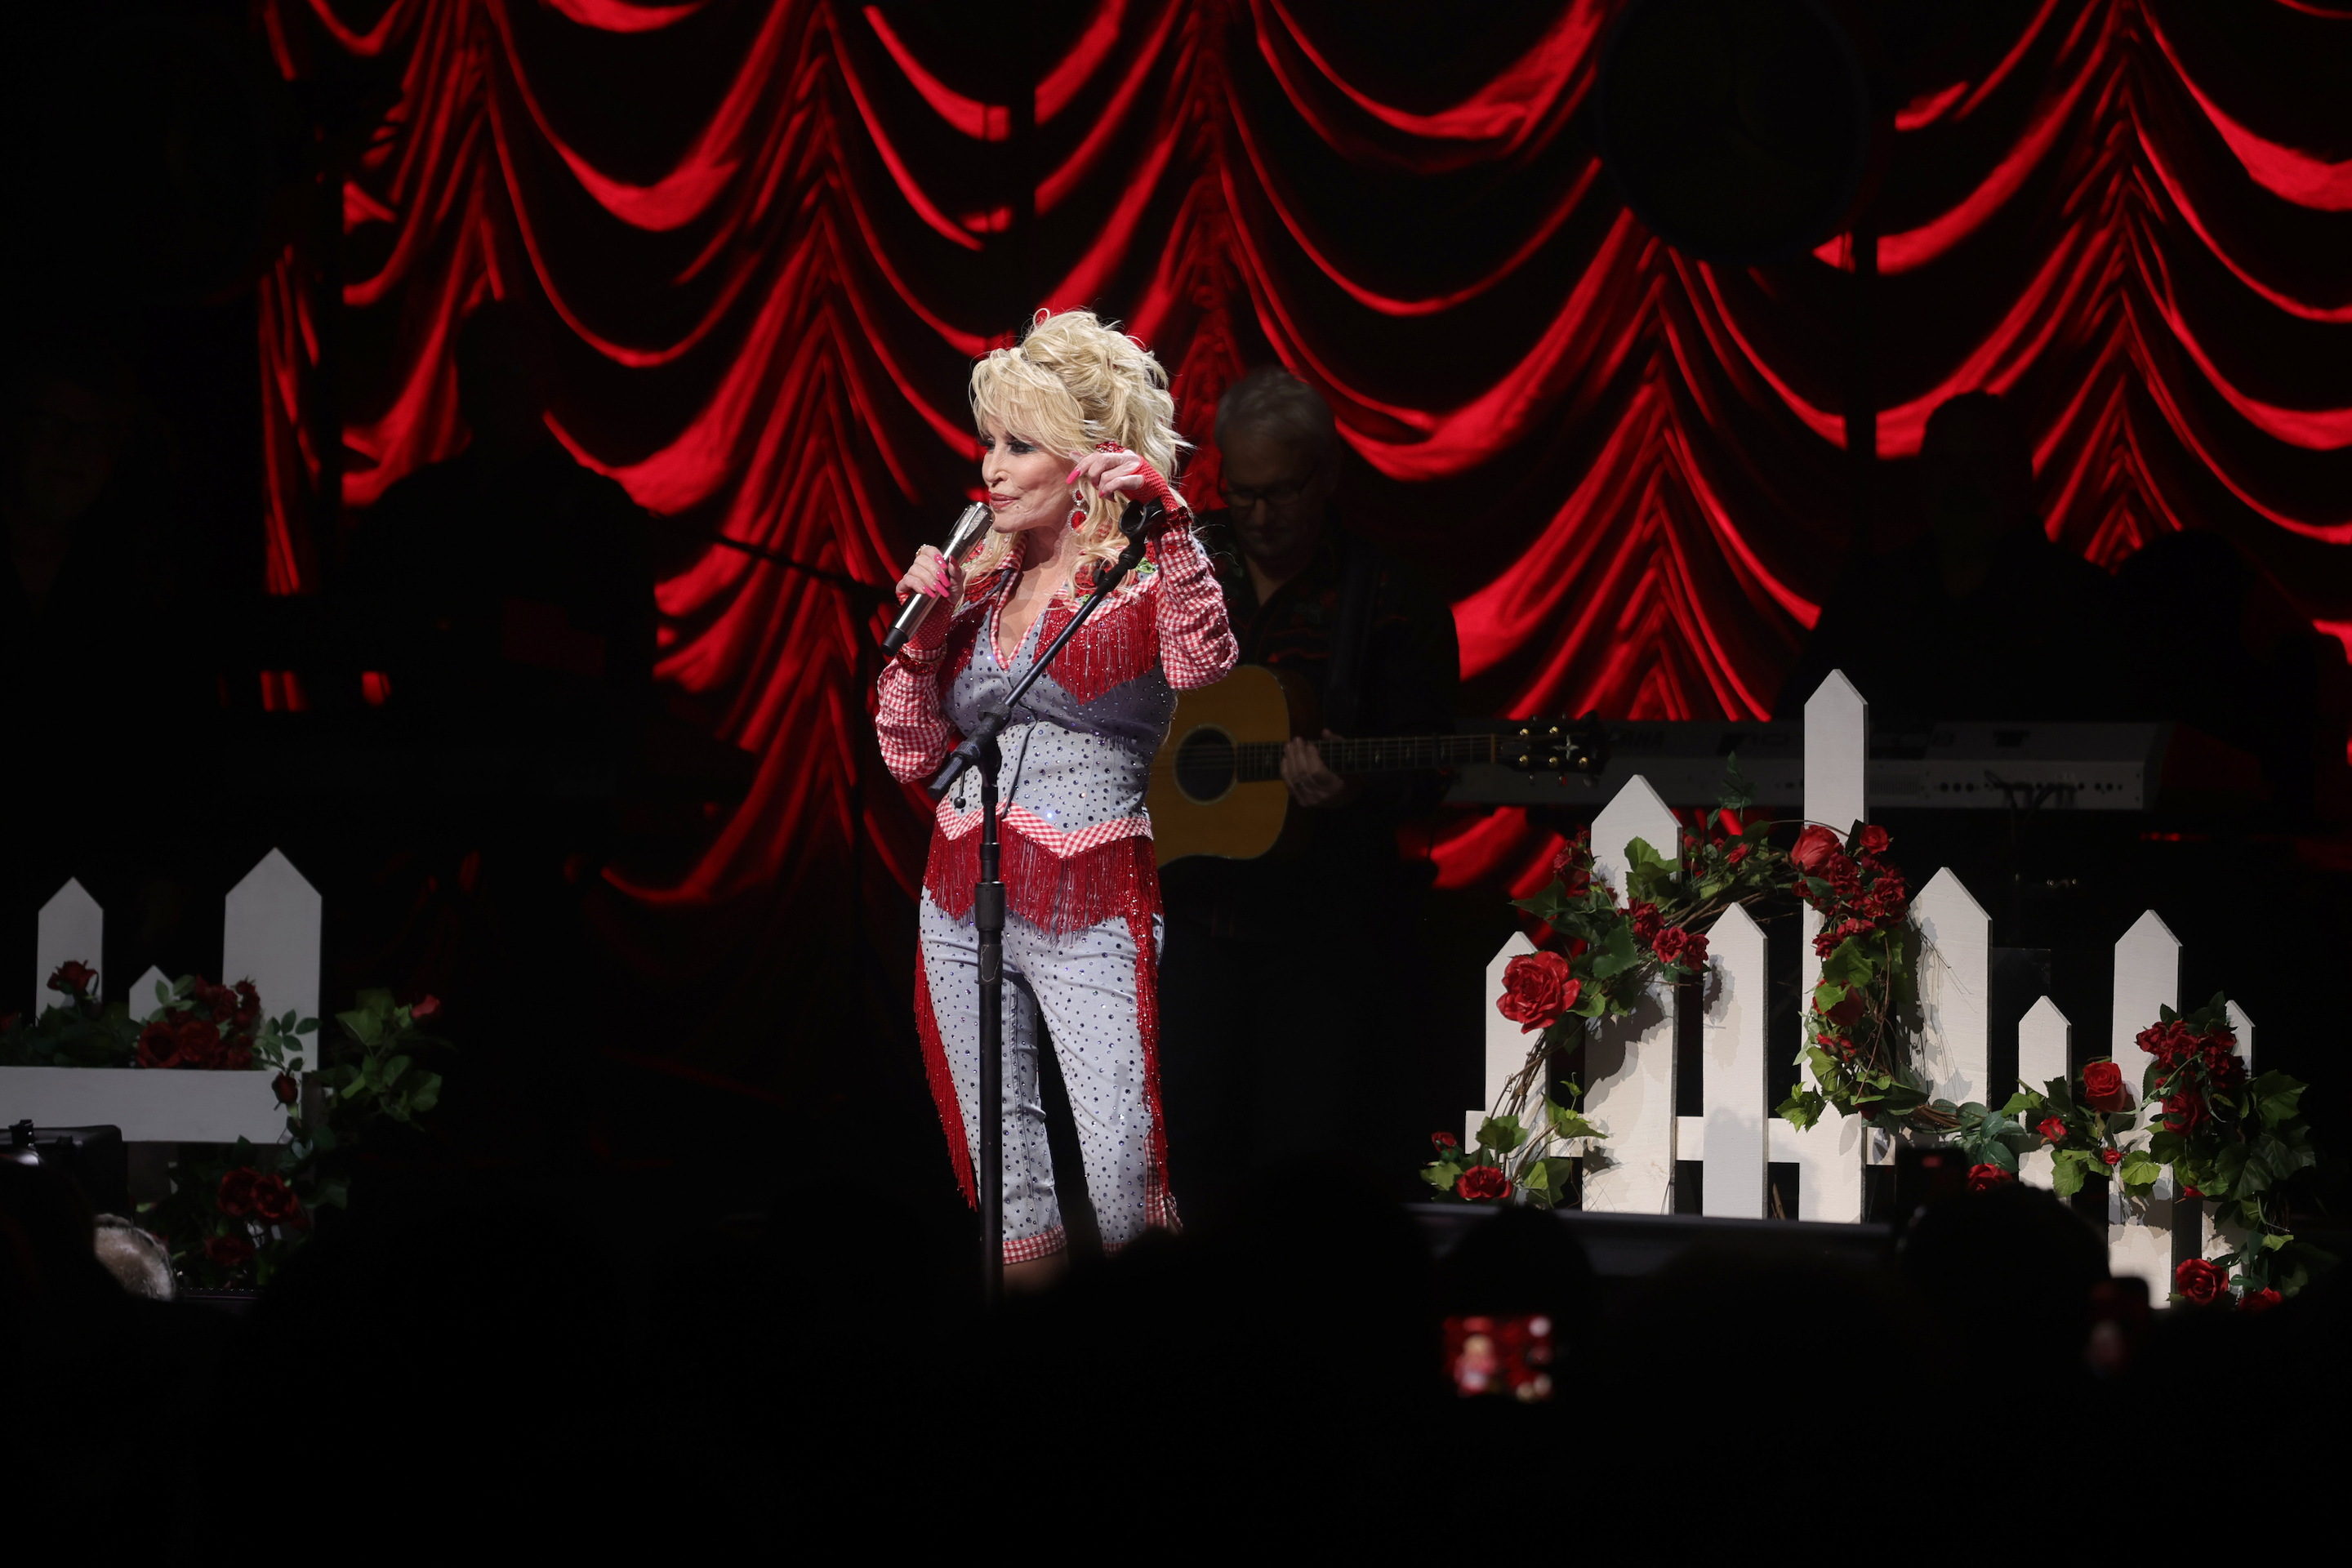 Dolly Parton performs on stage at ACL Live during Blockchain Creative Labs’ Dollyverse